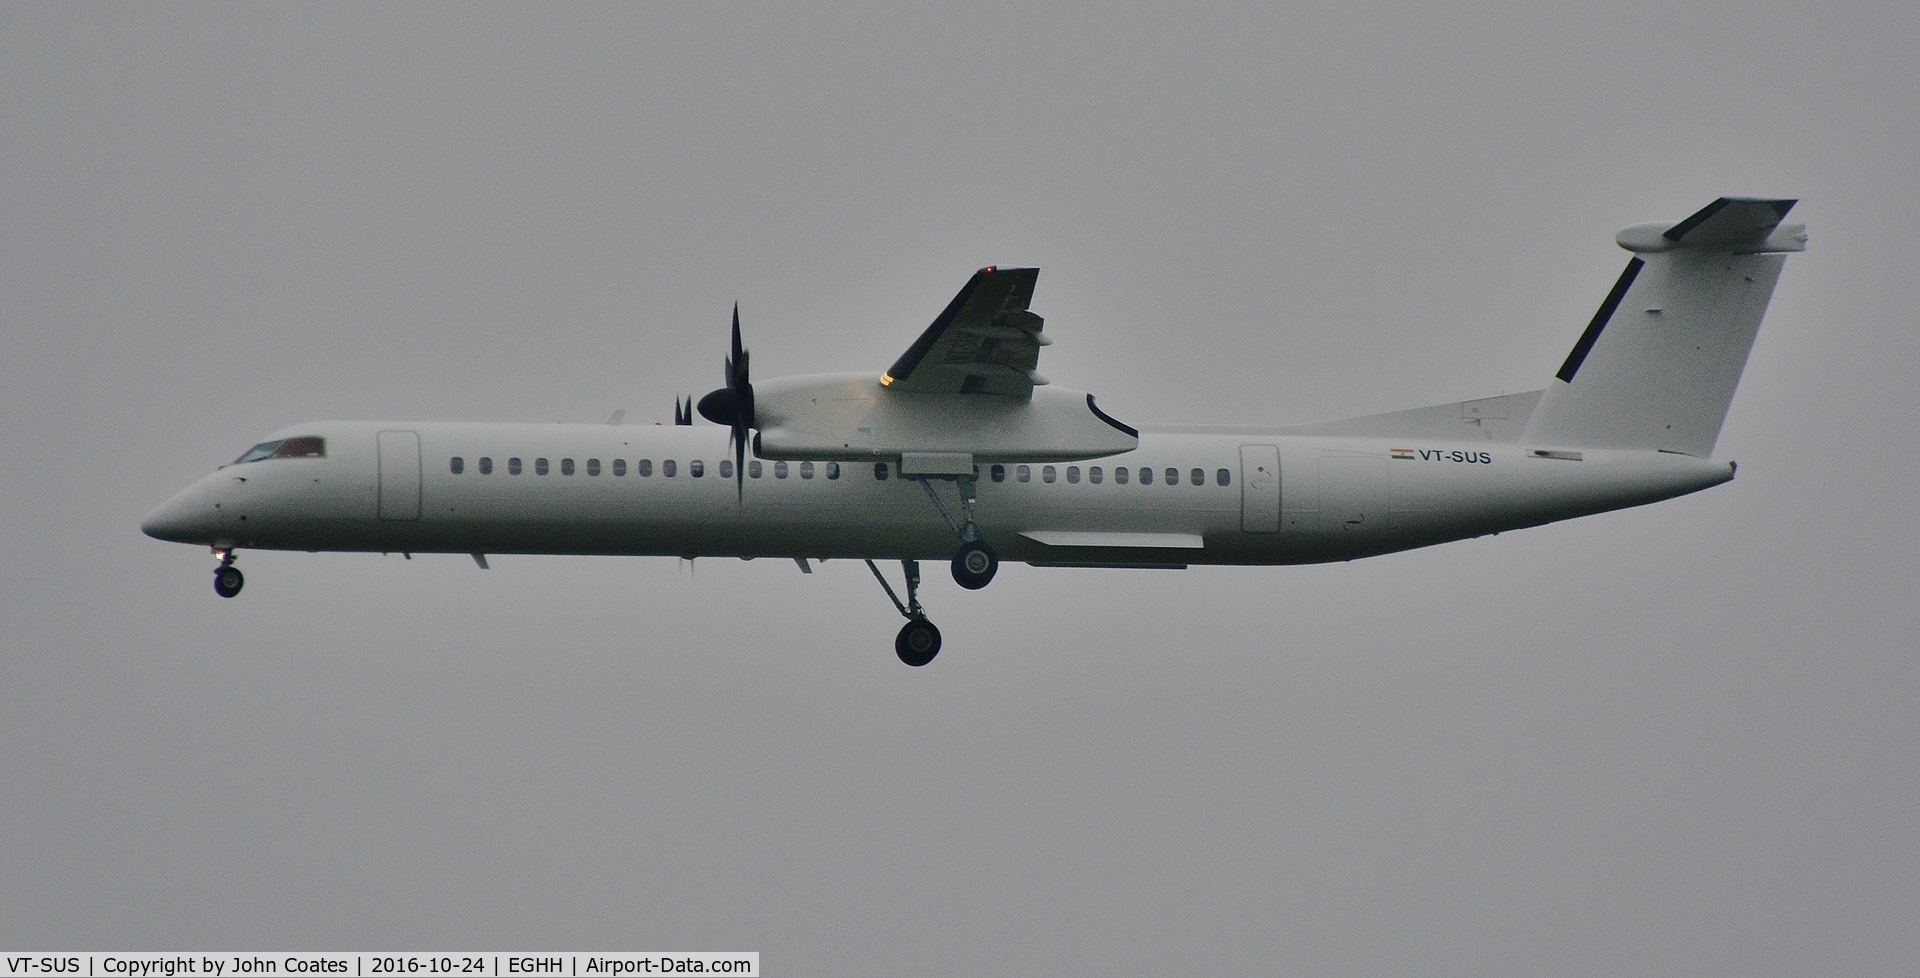 VT-SUS, 2010 Bombardier DHC-8-402 Dash 8 C/N 4346, ex N346NG on delivery flight in bad weather